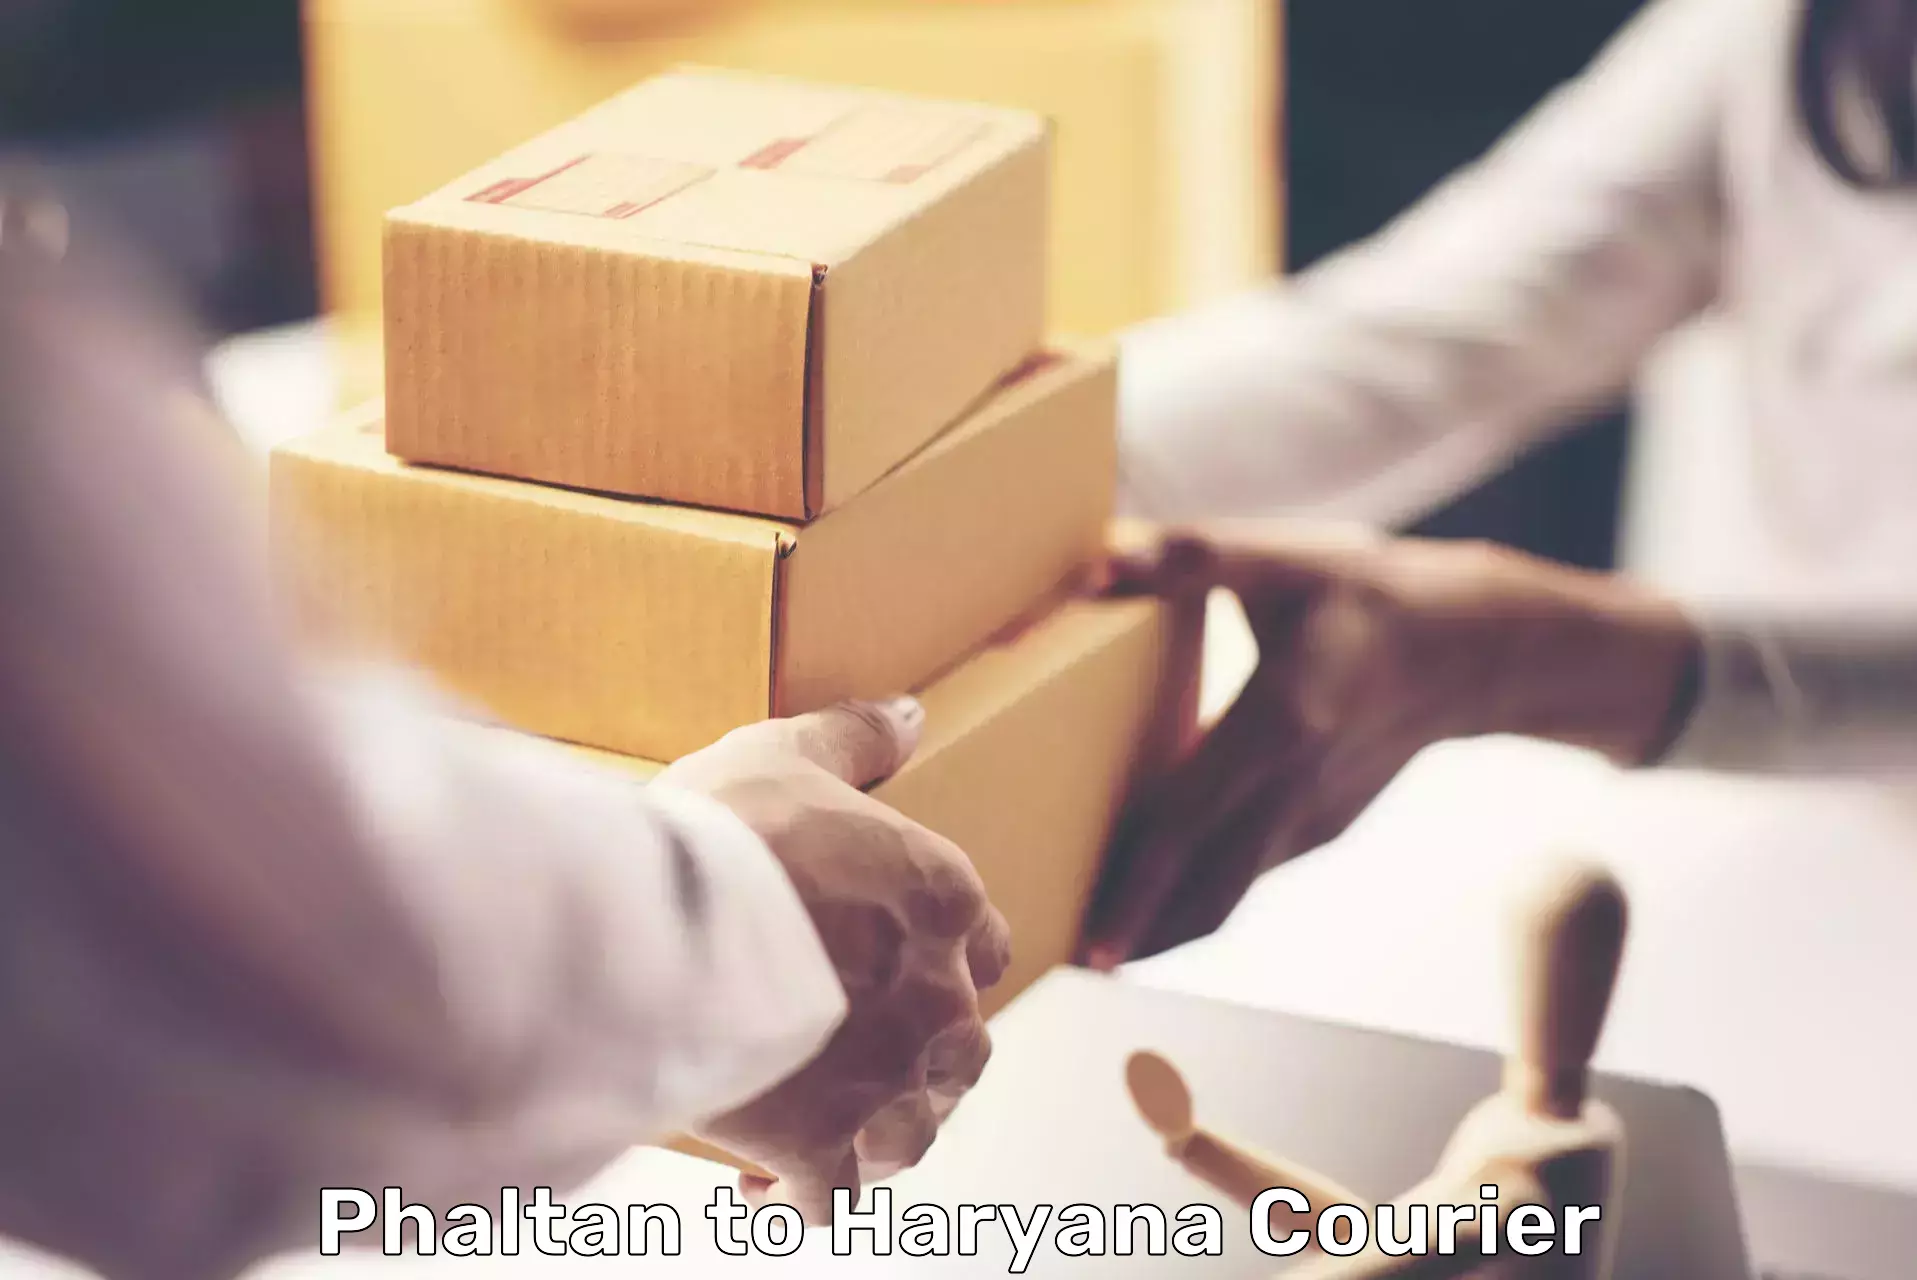 Courier service efficiency Phaltan to Assandh